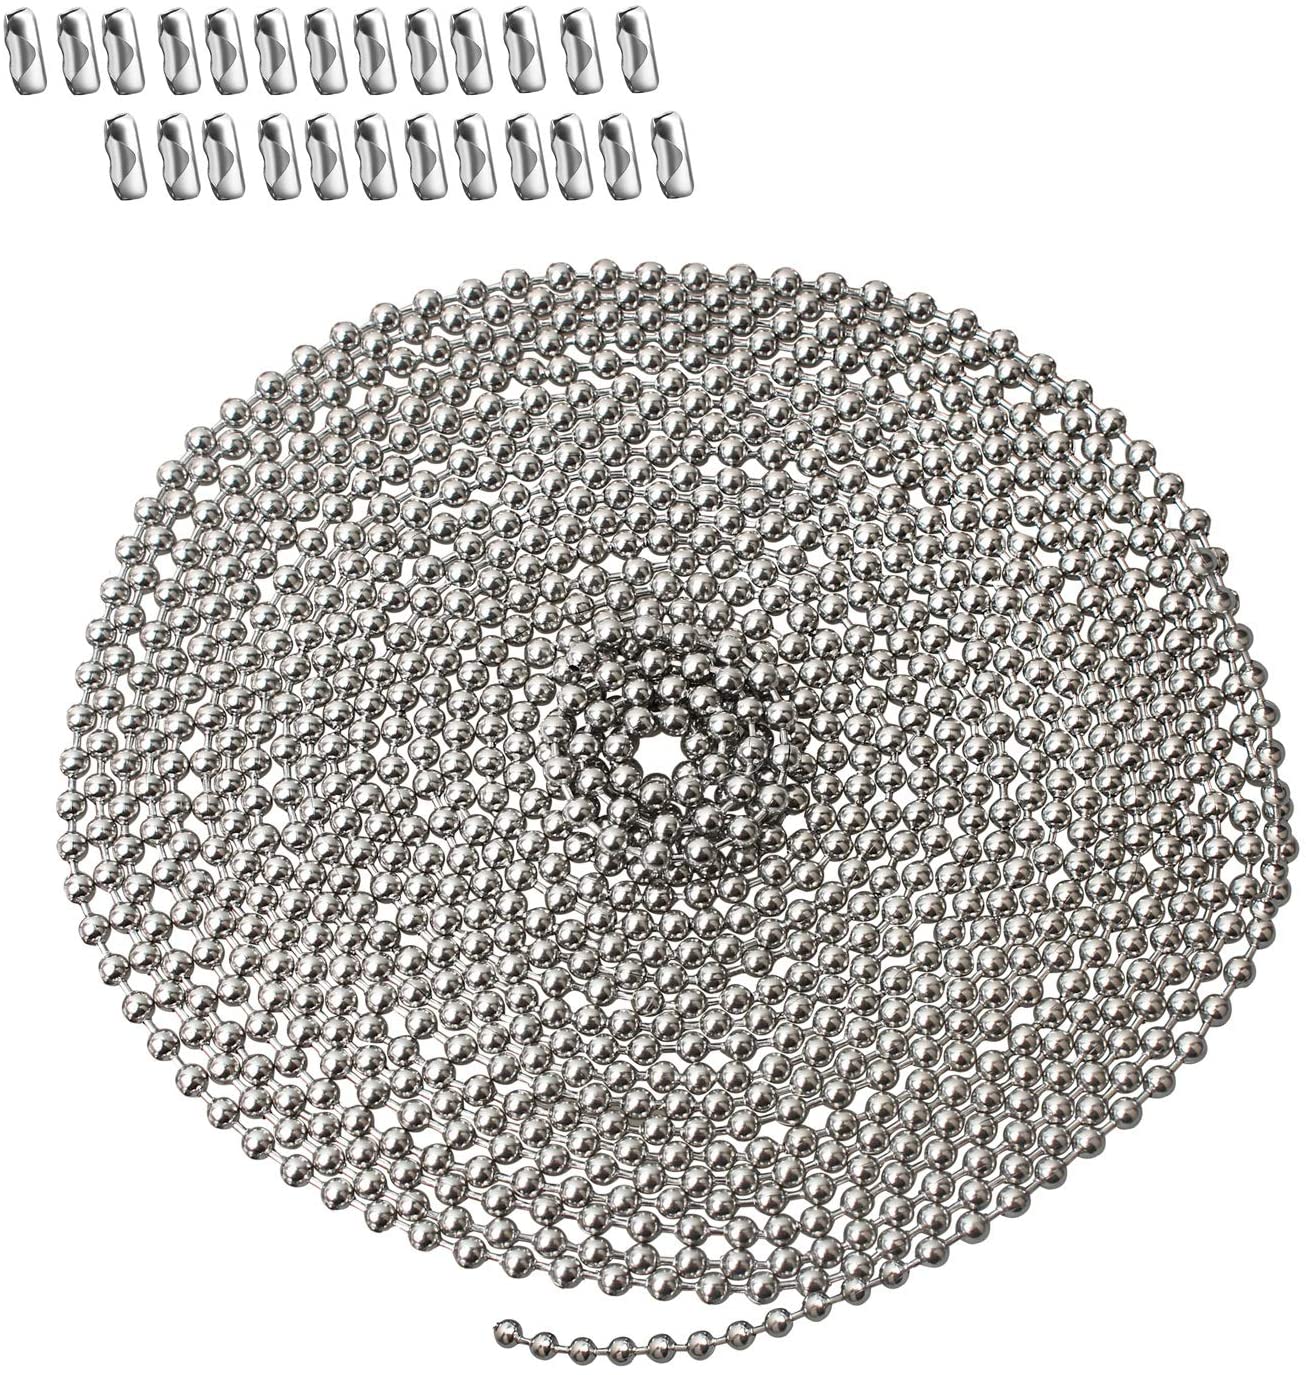 192 Inch Fan Pull Chain Extension with 25 PCS Connectors, Metal Ceiling Fan Chain Connector, Stainless Steel Bead Chain(3.2mm Diameter, Bronze)